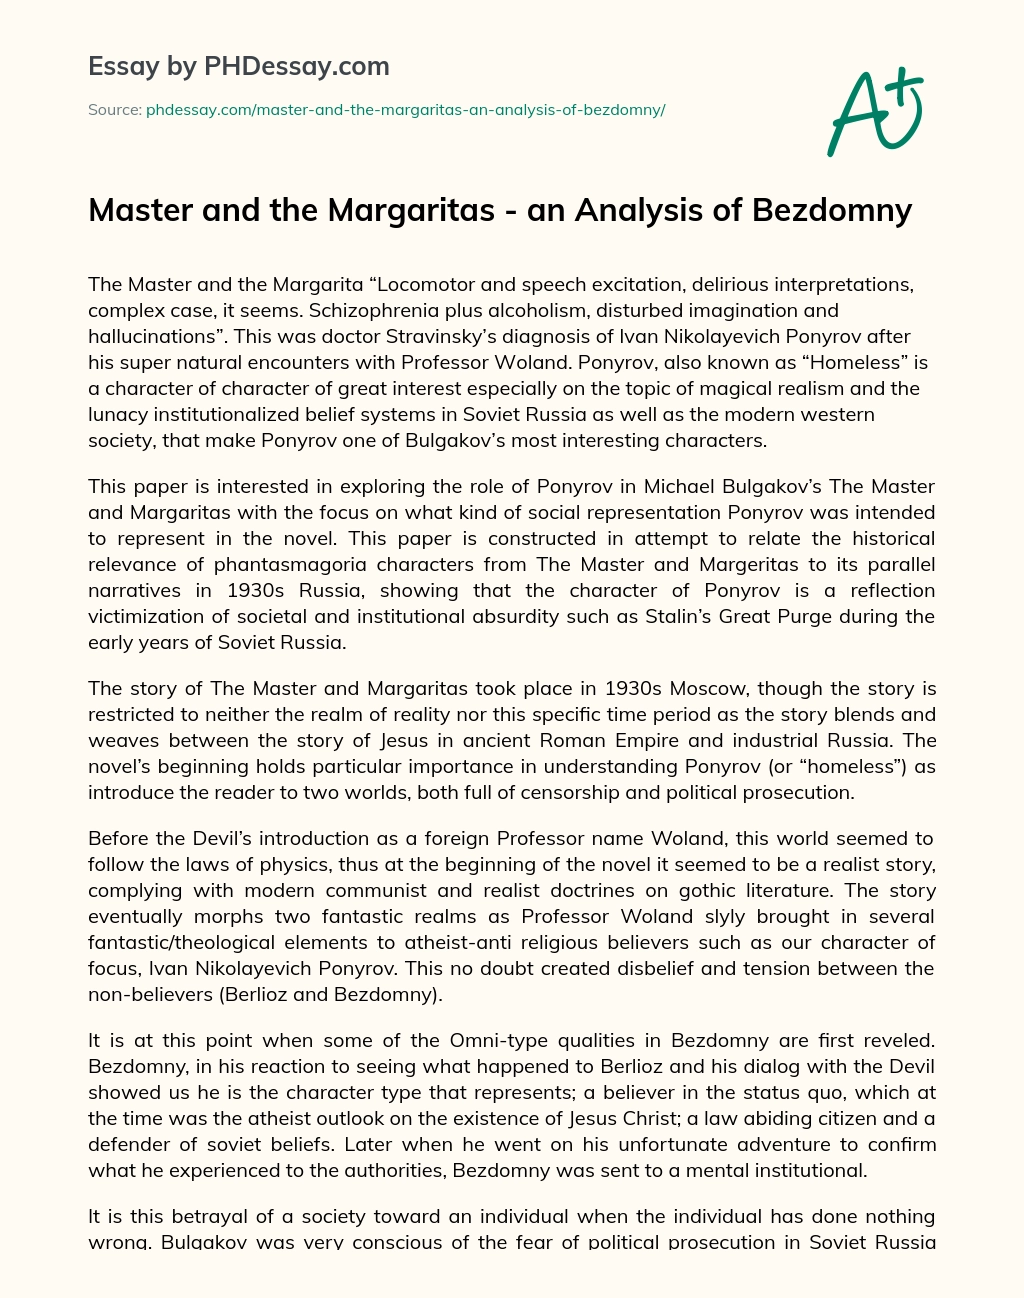 Master and the Margaritas – an Analysis of Bezdomny essay